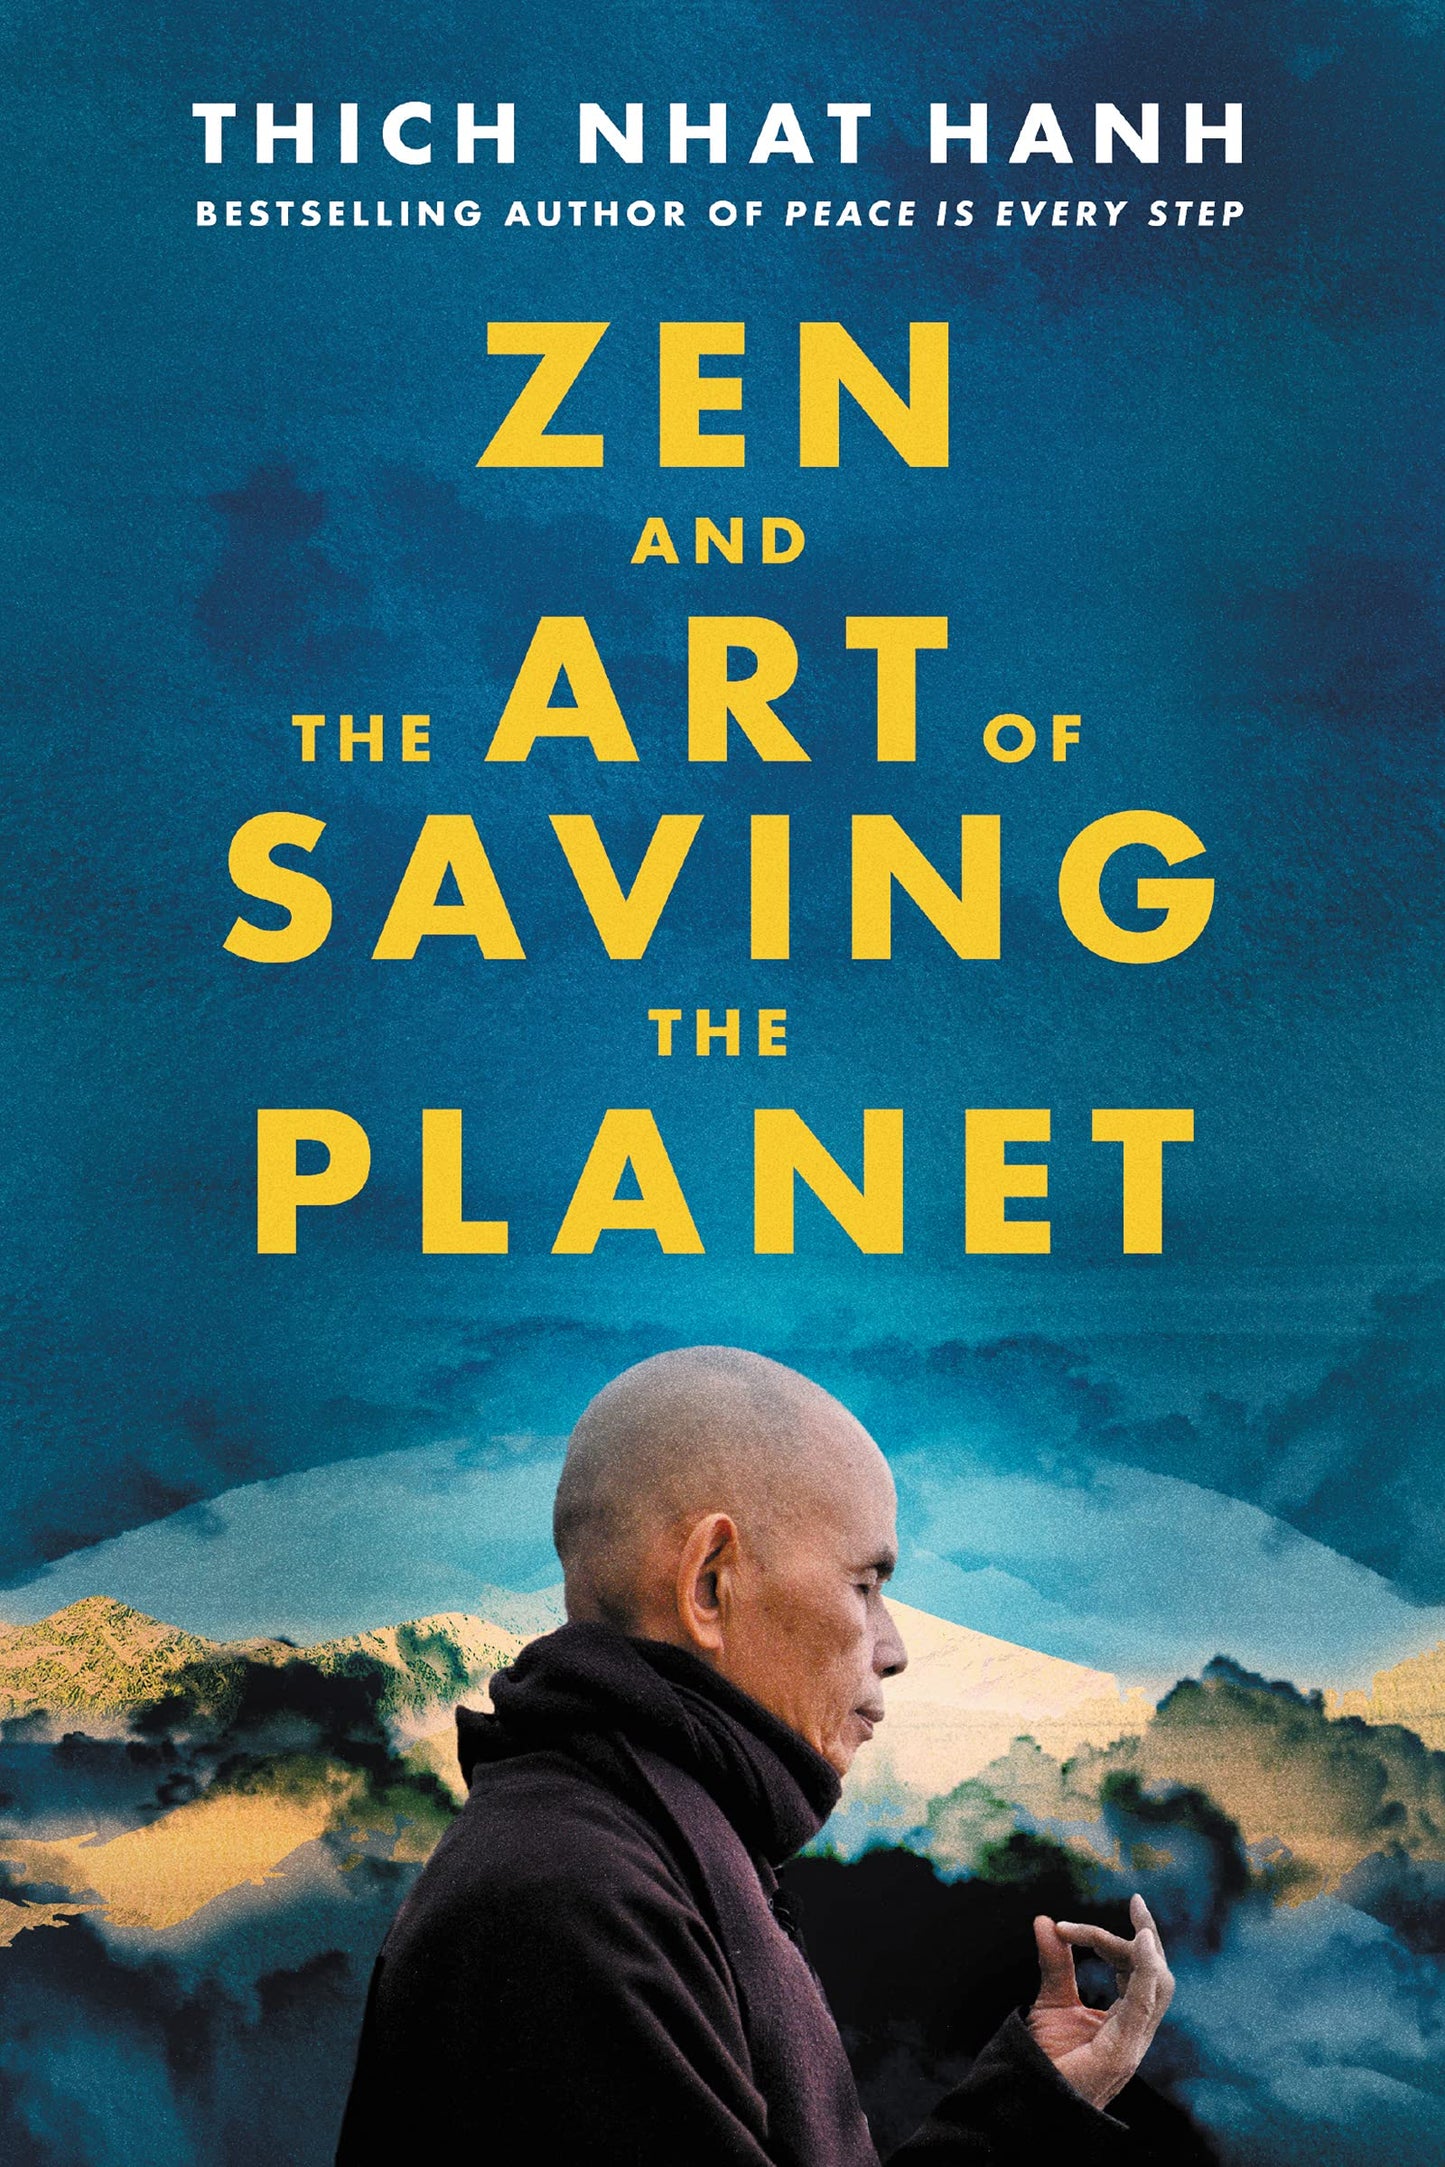 Zen and the Art of Saving the Planet- Thich Nhat Hanh